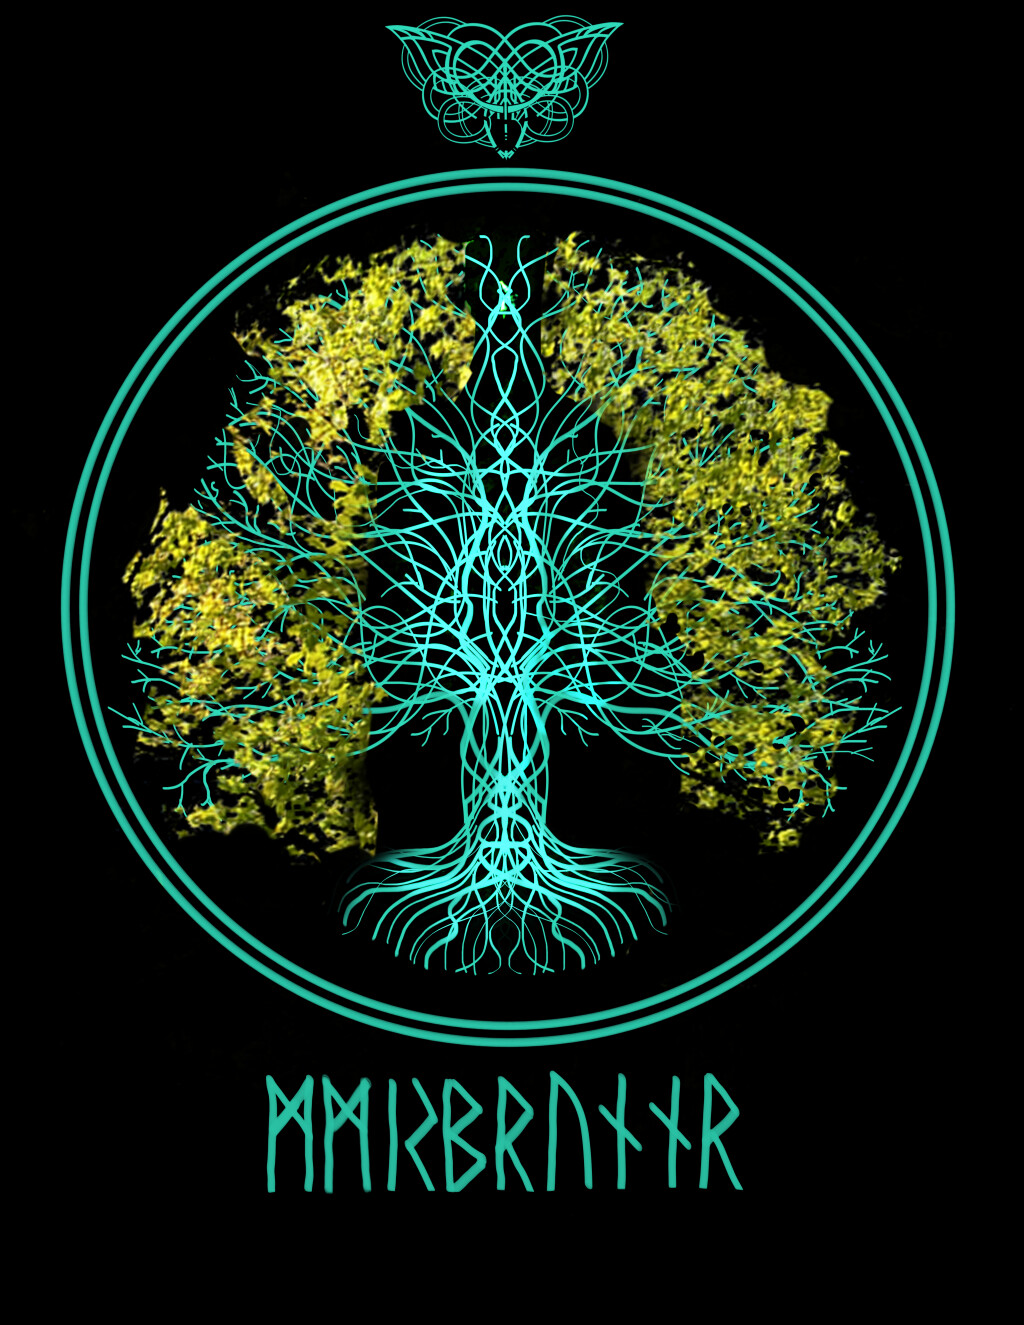 According to the Norse mythology, the Mímisbrunnr is the well of Mimir, the wisest of the gods of the tribe Aesir who was also believed to be a water spirit.  A story has it that Odin had once given one of his eyes to the well in order to drink from it.